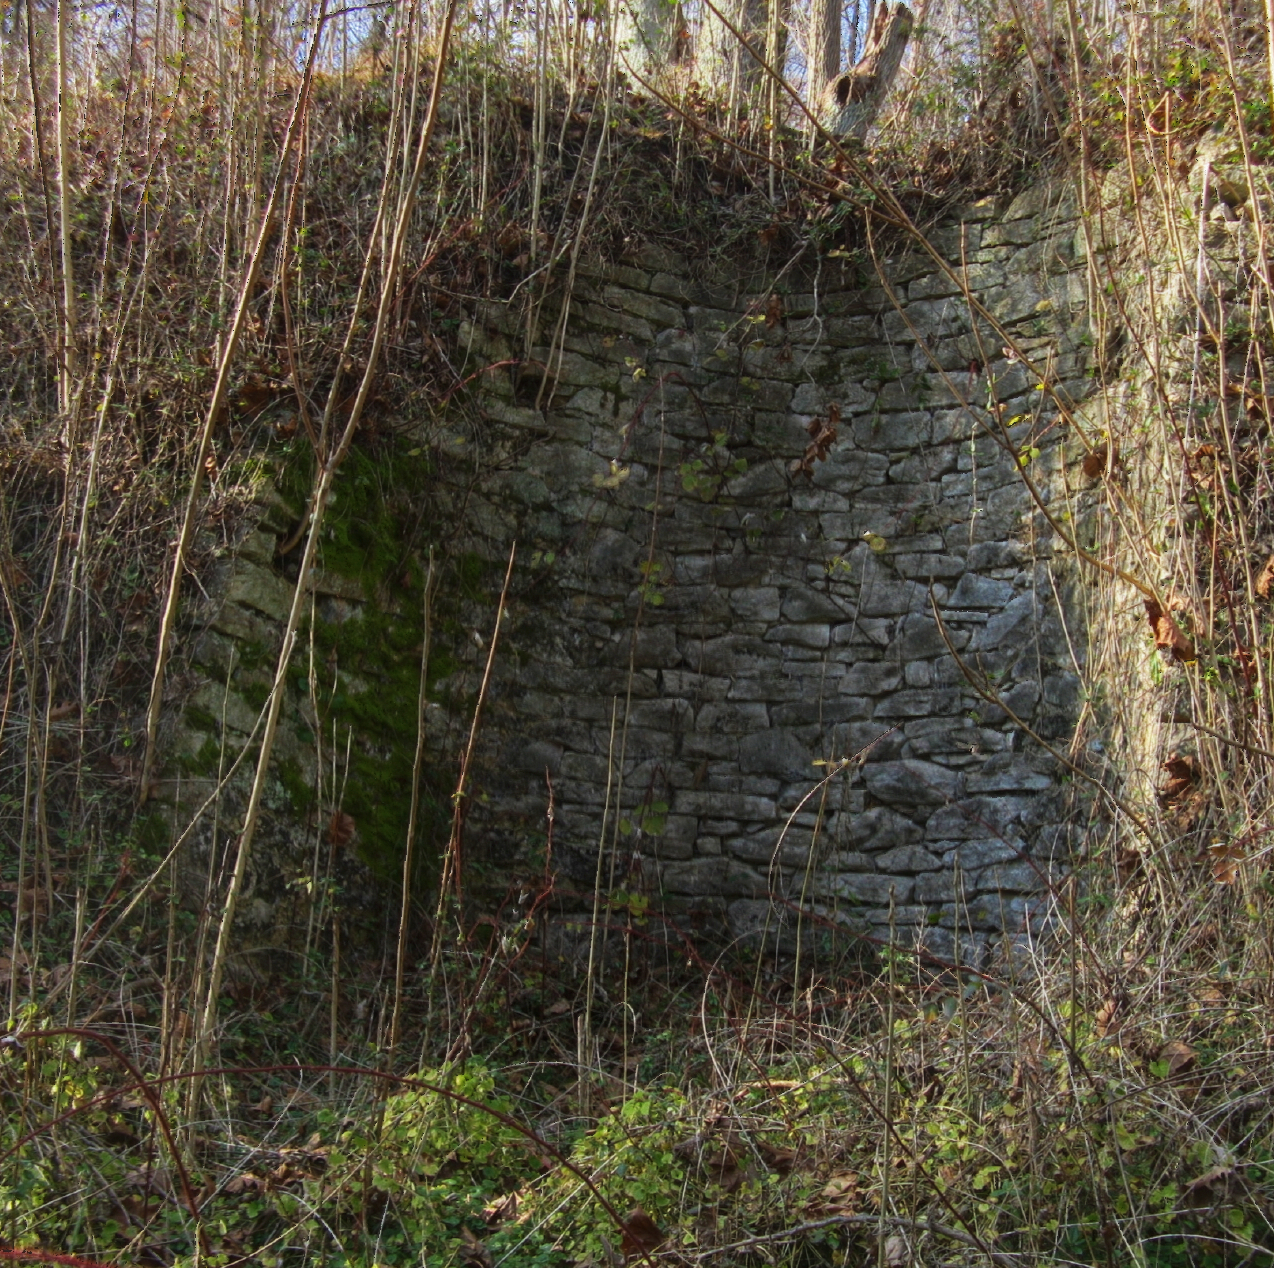 a stone structure overgrown by grass in an abandoned forest